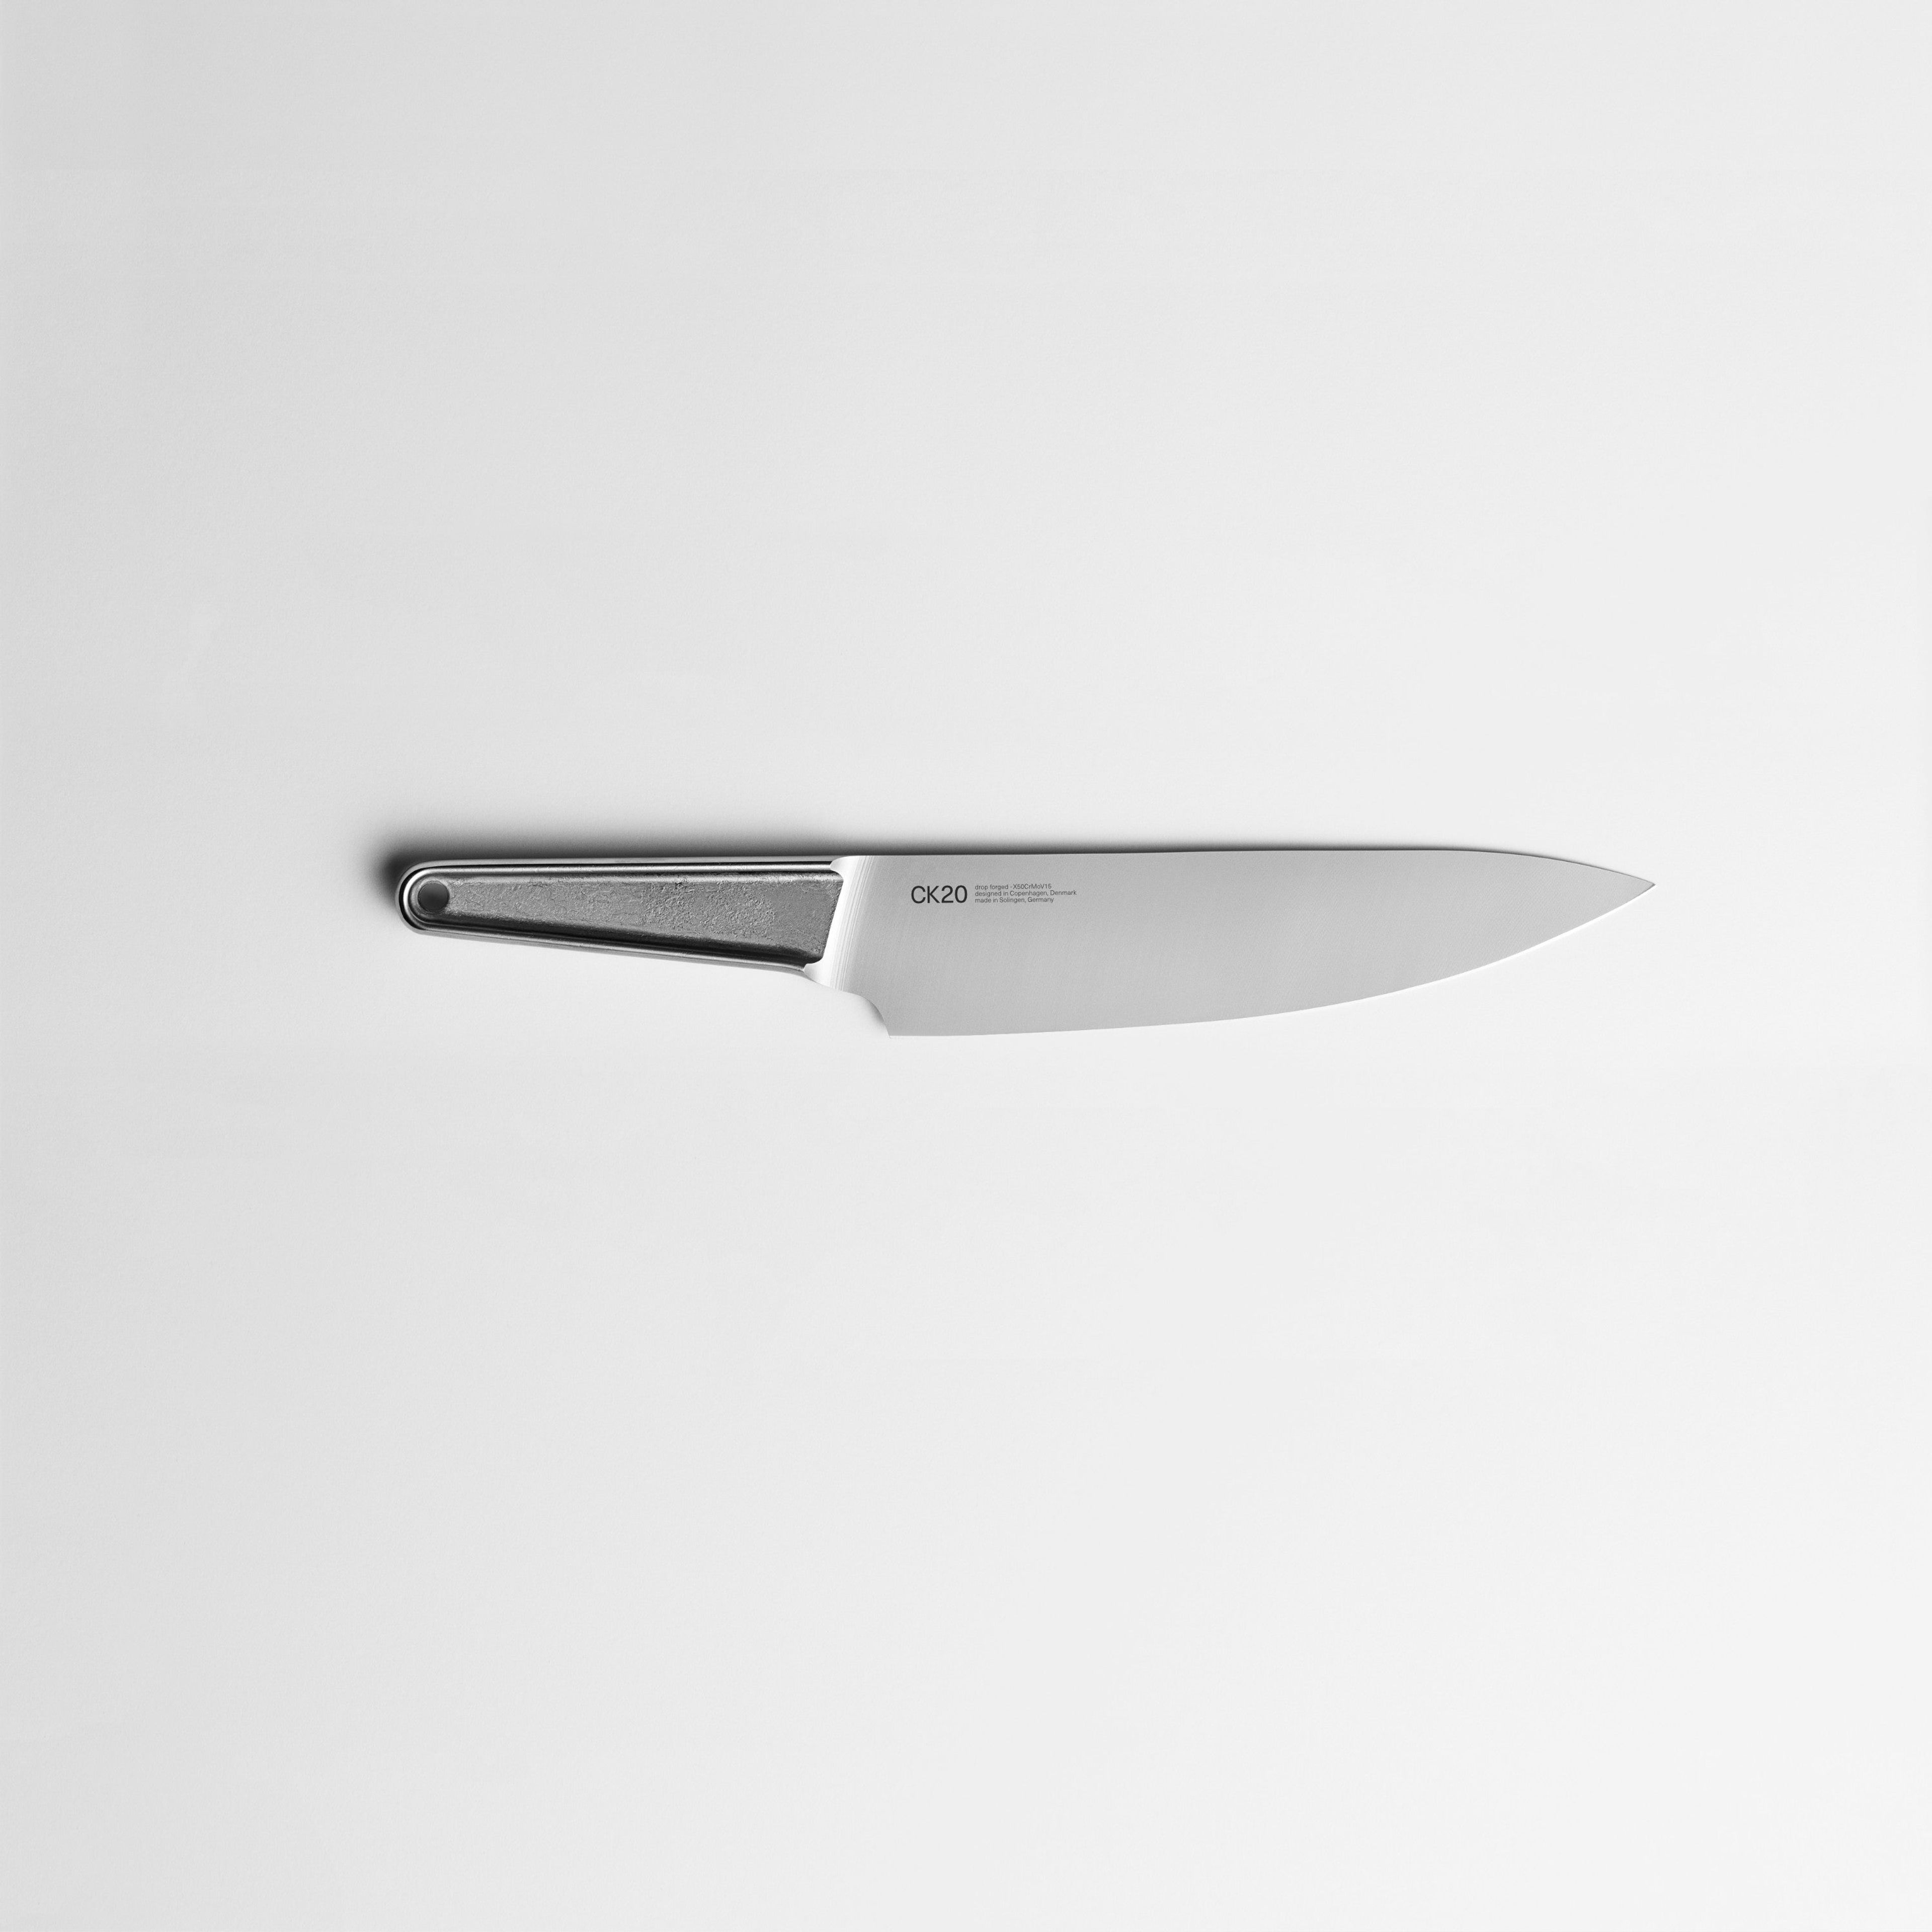 Veark CK20 Forged Chef's Knife